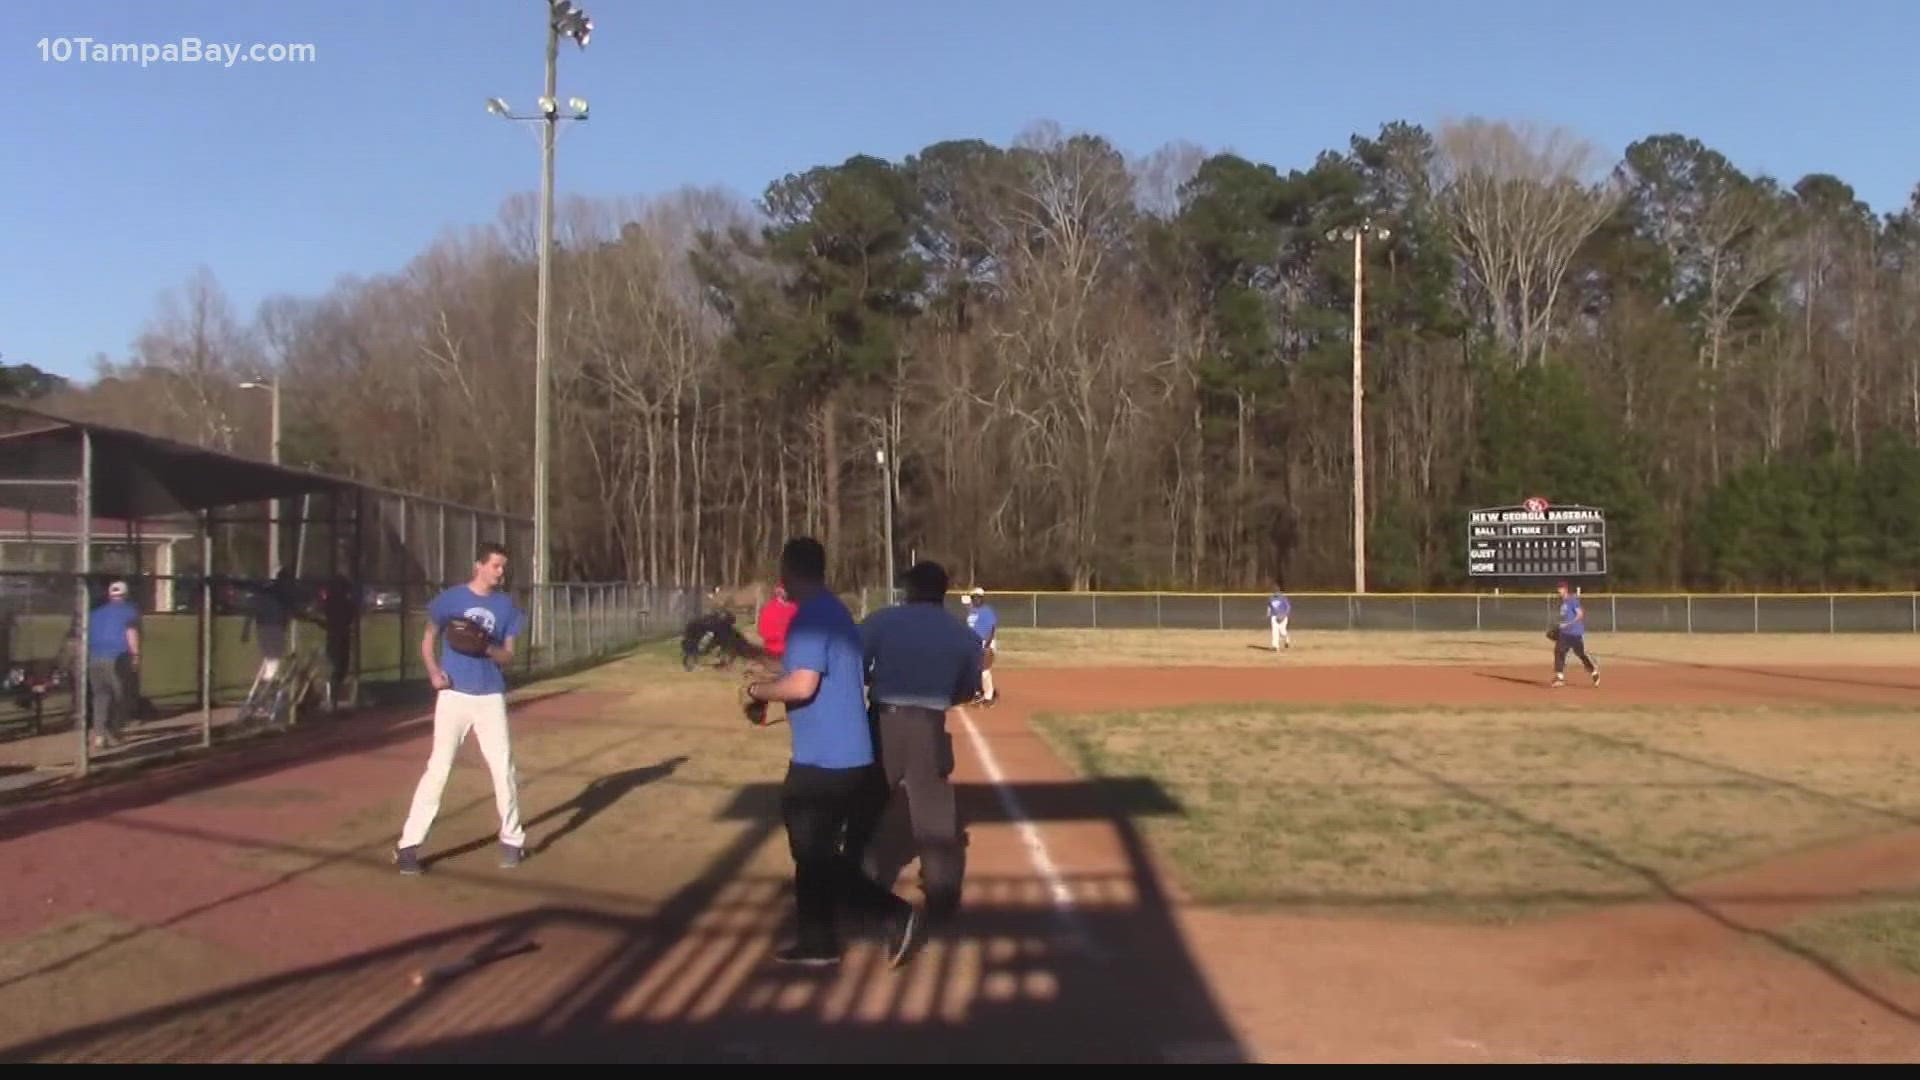 Alternative Baseball gives people with special needs the chance to play traditional baseball.